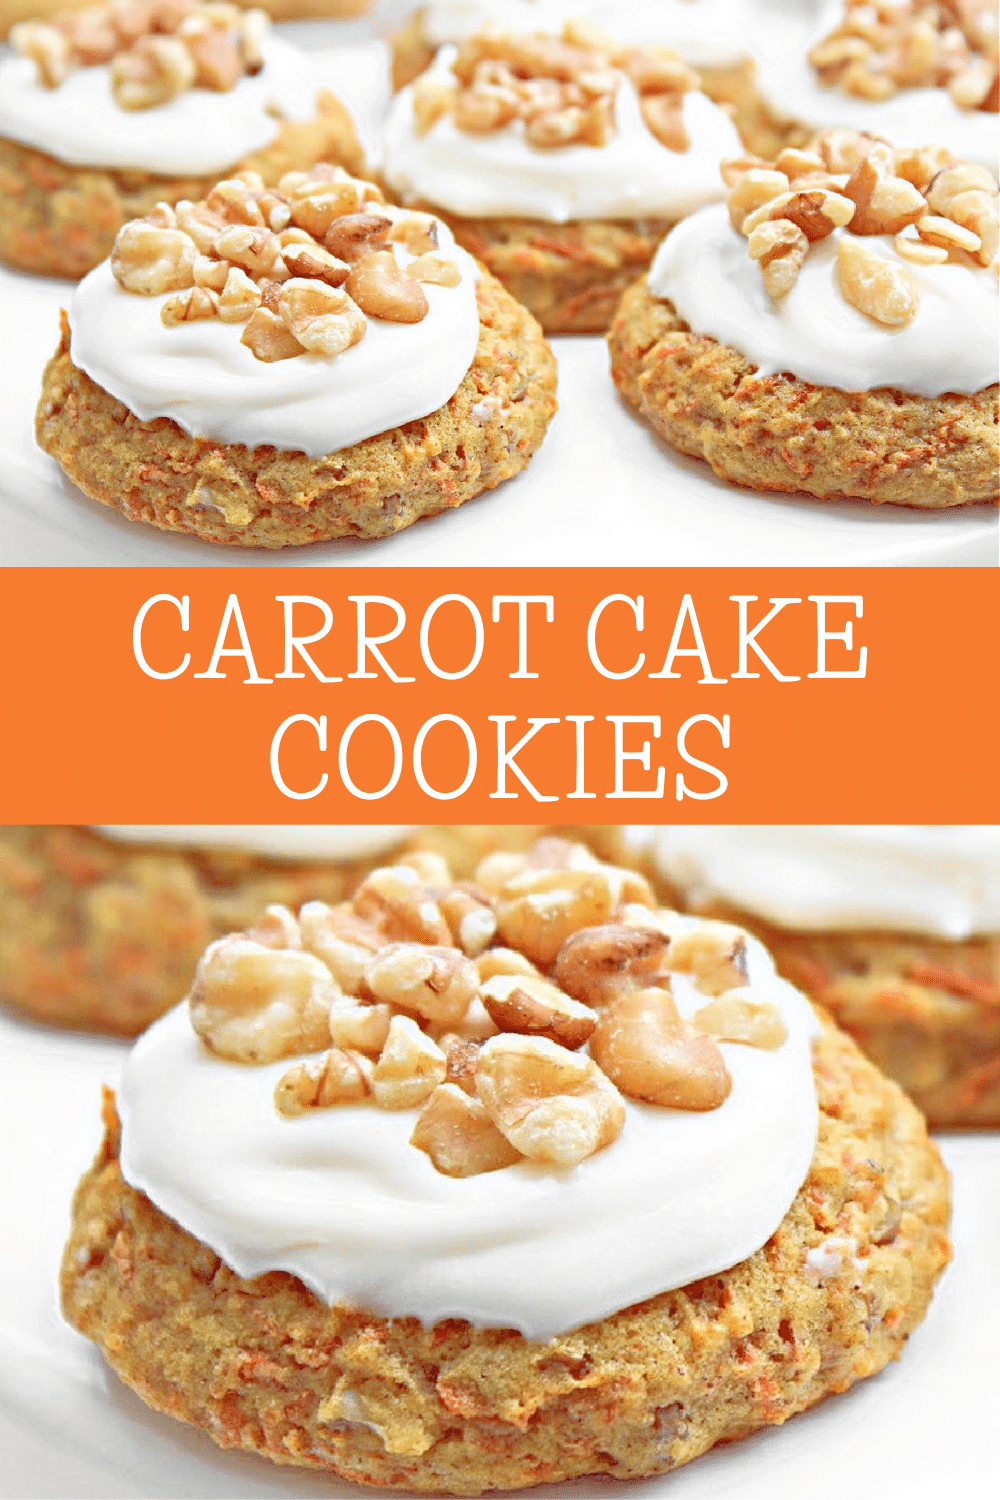 Carrot Cake Cookies ~ All the classic flavors of traditional carrot cake and creamy frosting in a bite-sized indulgence, perfect for Easter brunch! via @thiswifecooks